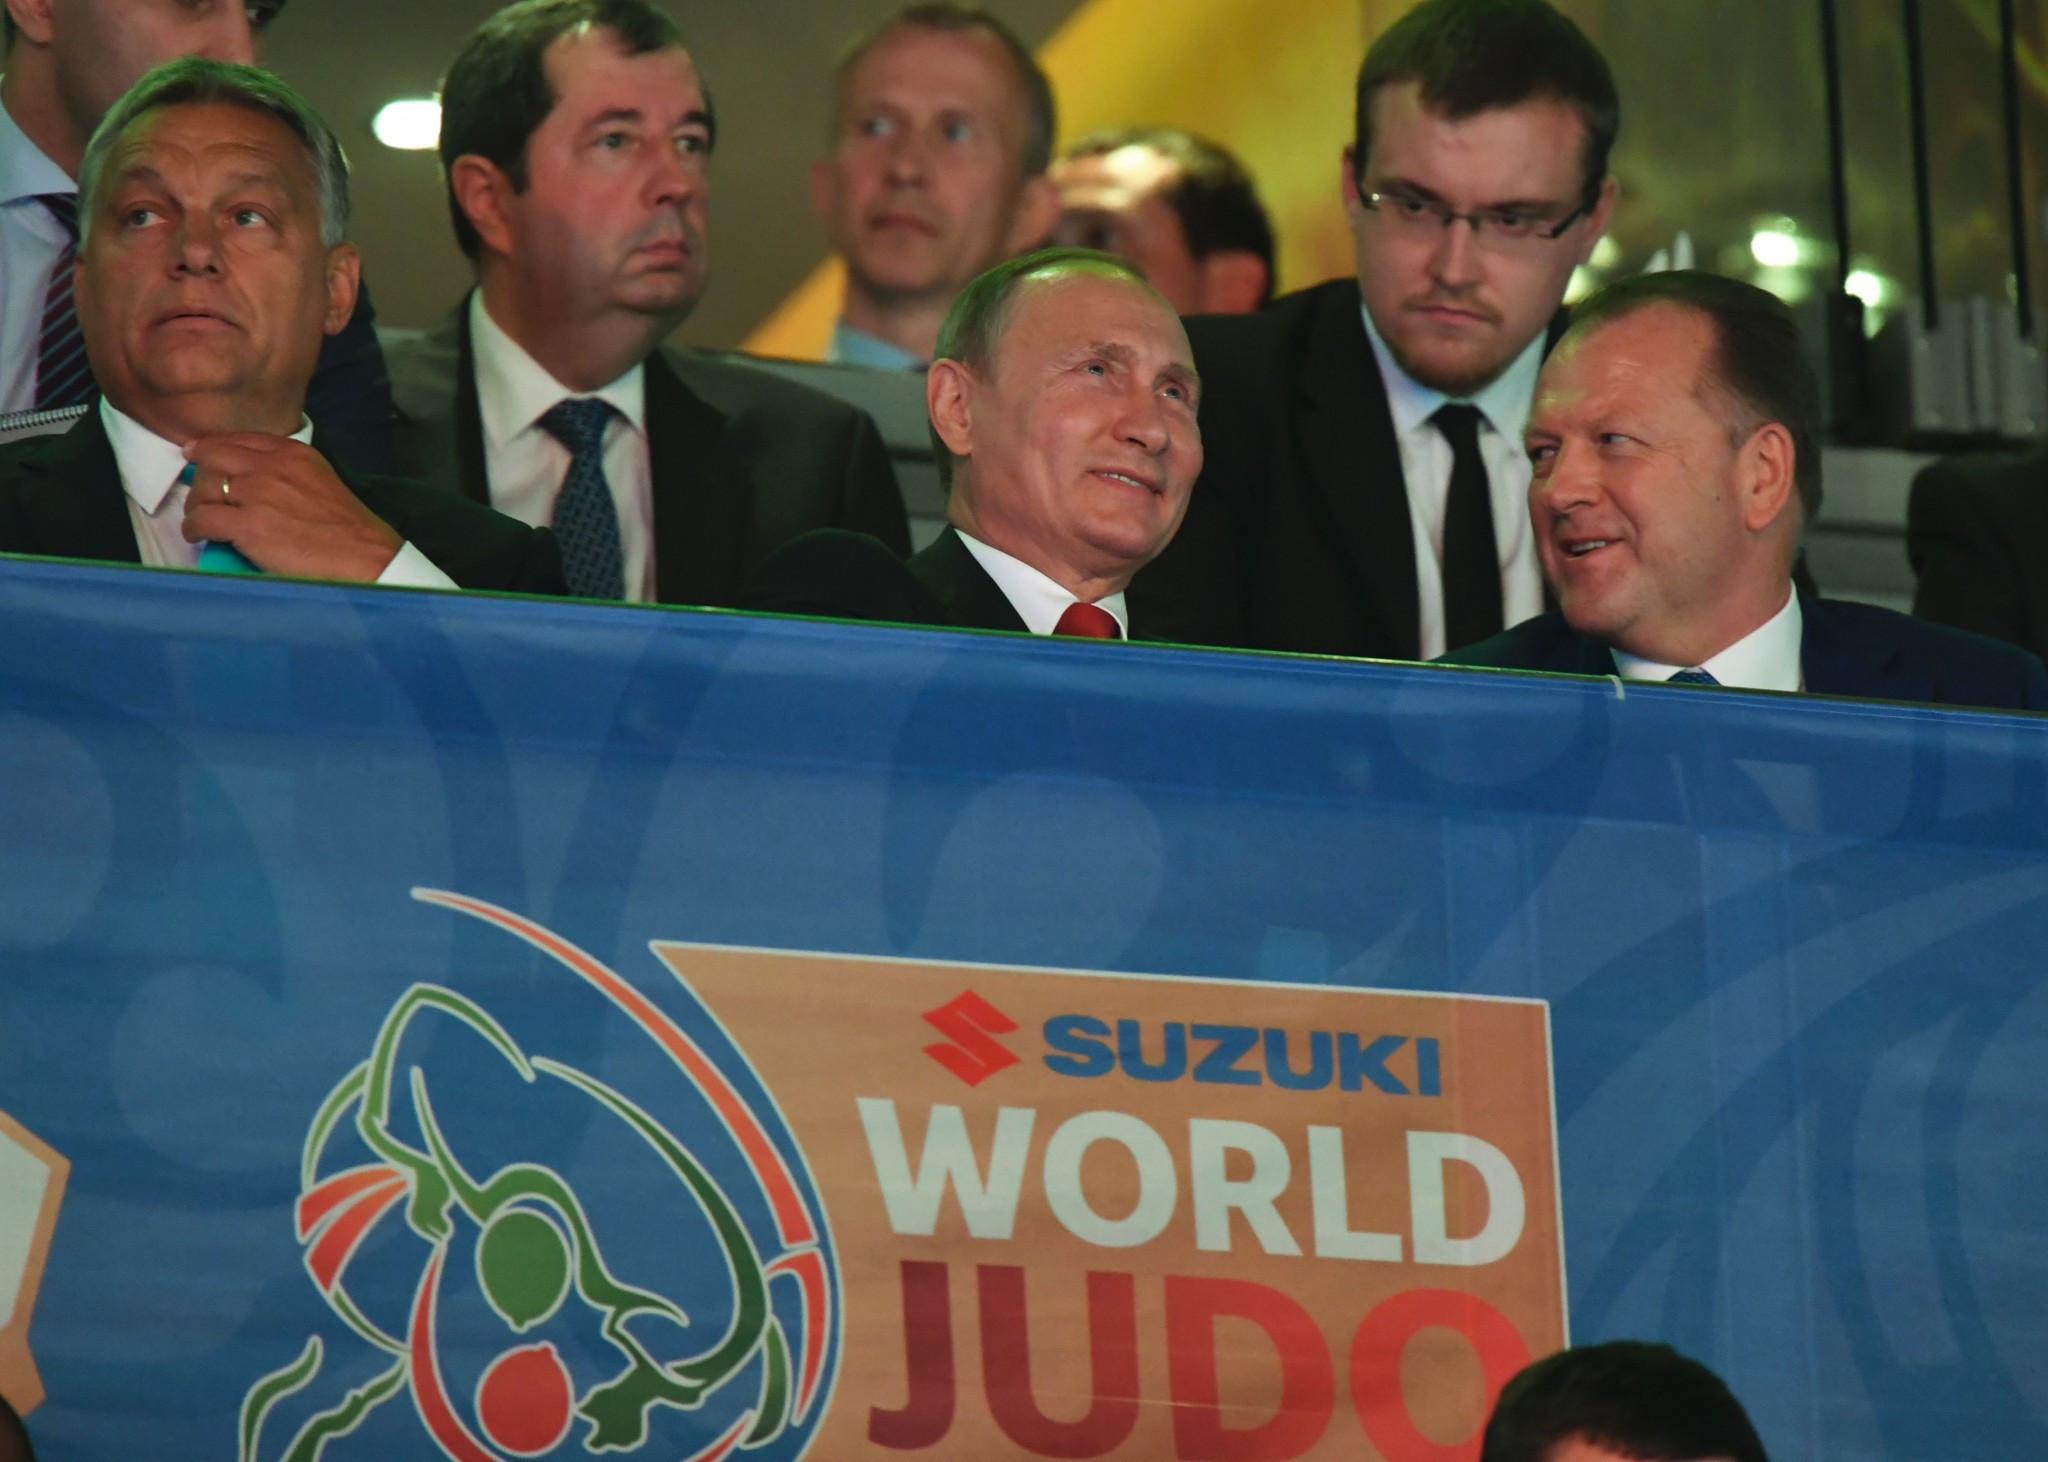 Vladimir Putin was among the guests for the first day of the event ©Getty Images